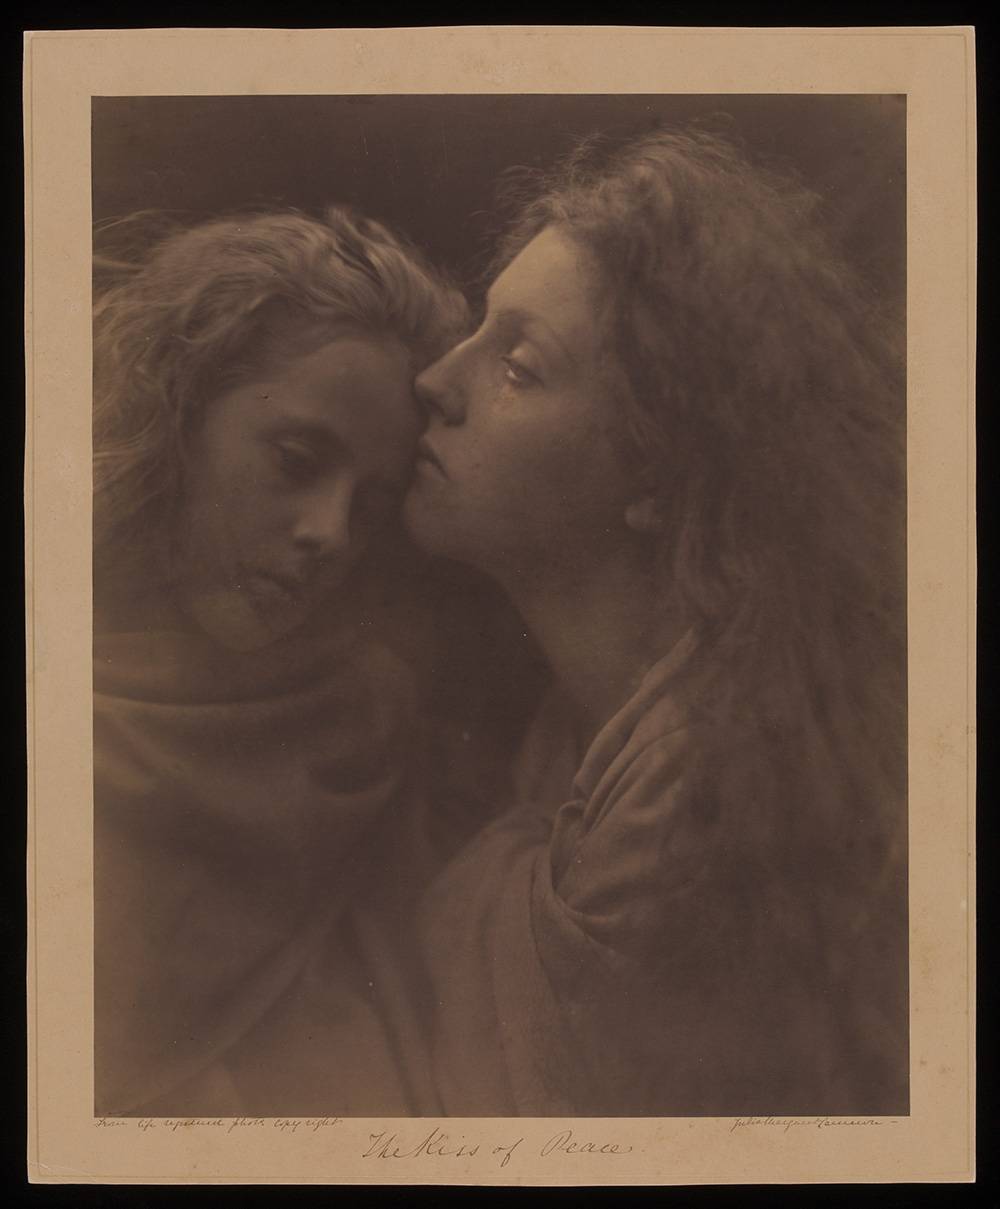 Julia Margaret Cameron, Kiss of Peace [Baiser de Paix], 1869 Tirage albuminé, © The Royal Photographic Society Collection at the V&A, acquired with the generous assistance of the National Lottery Heritage Fund and Art Fund.